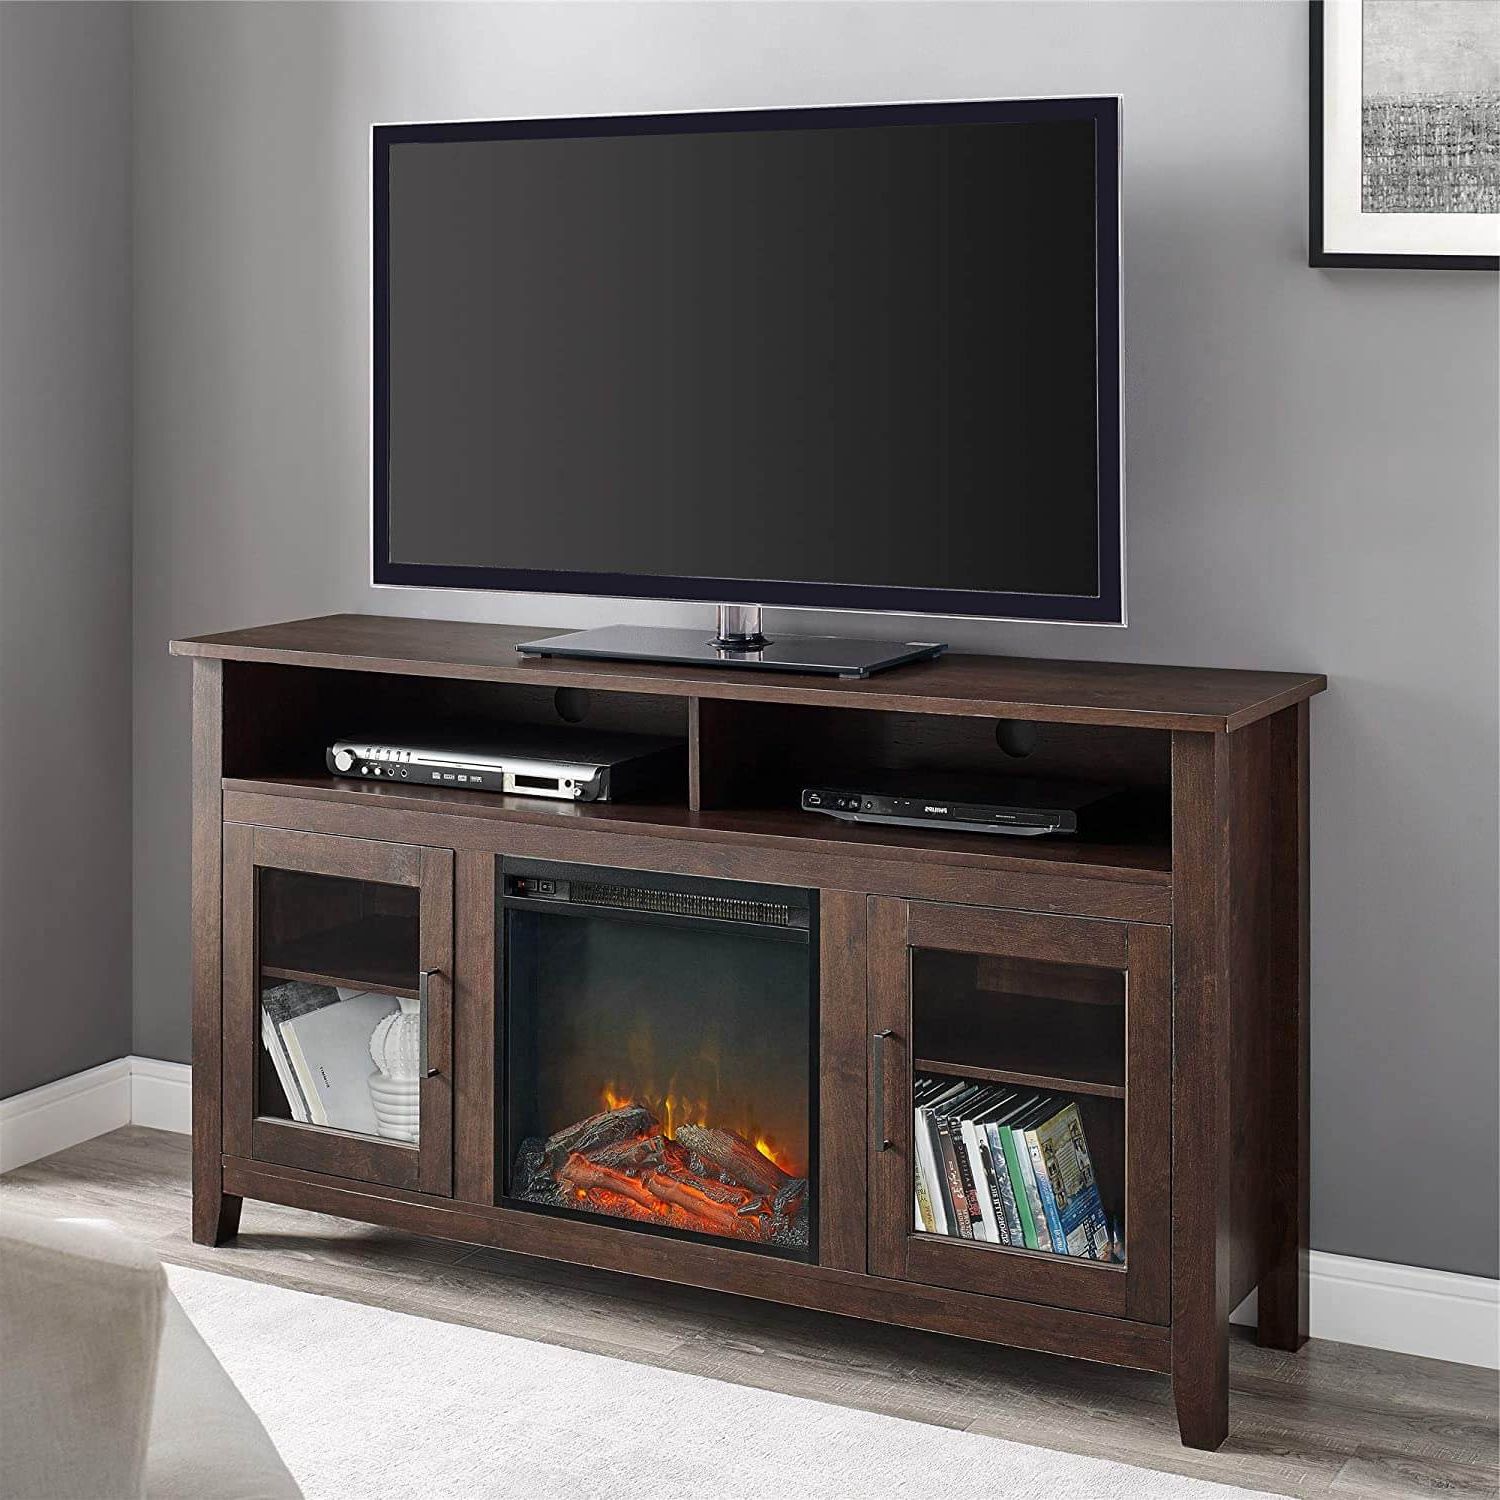 Walker Edison Rustic Wood And Glass Tall Fireplace Stand For Walker Edison Farmhouse Tv Stands With Storage Cabinet Doors And Shelves (View 9 of 20)